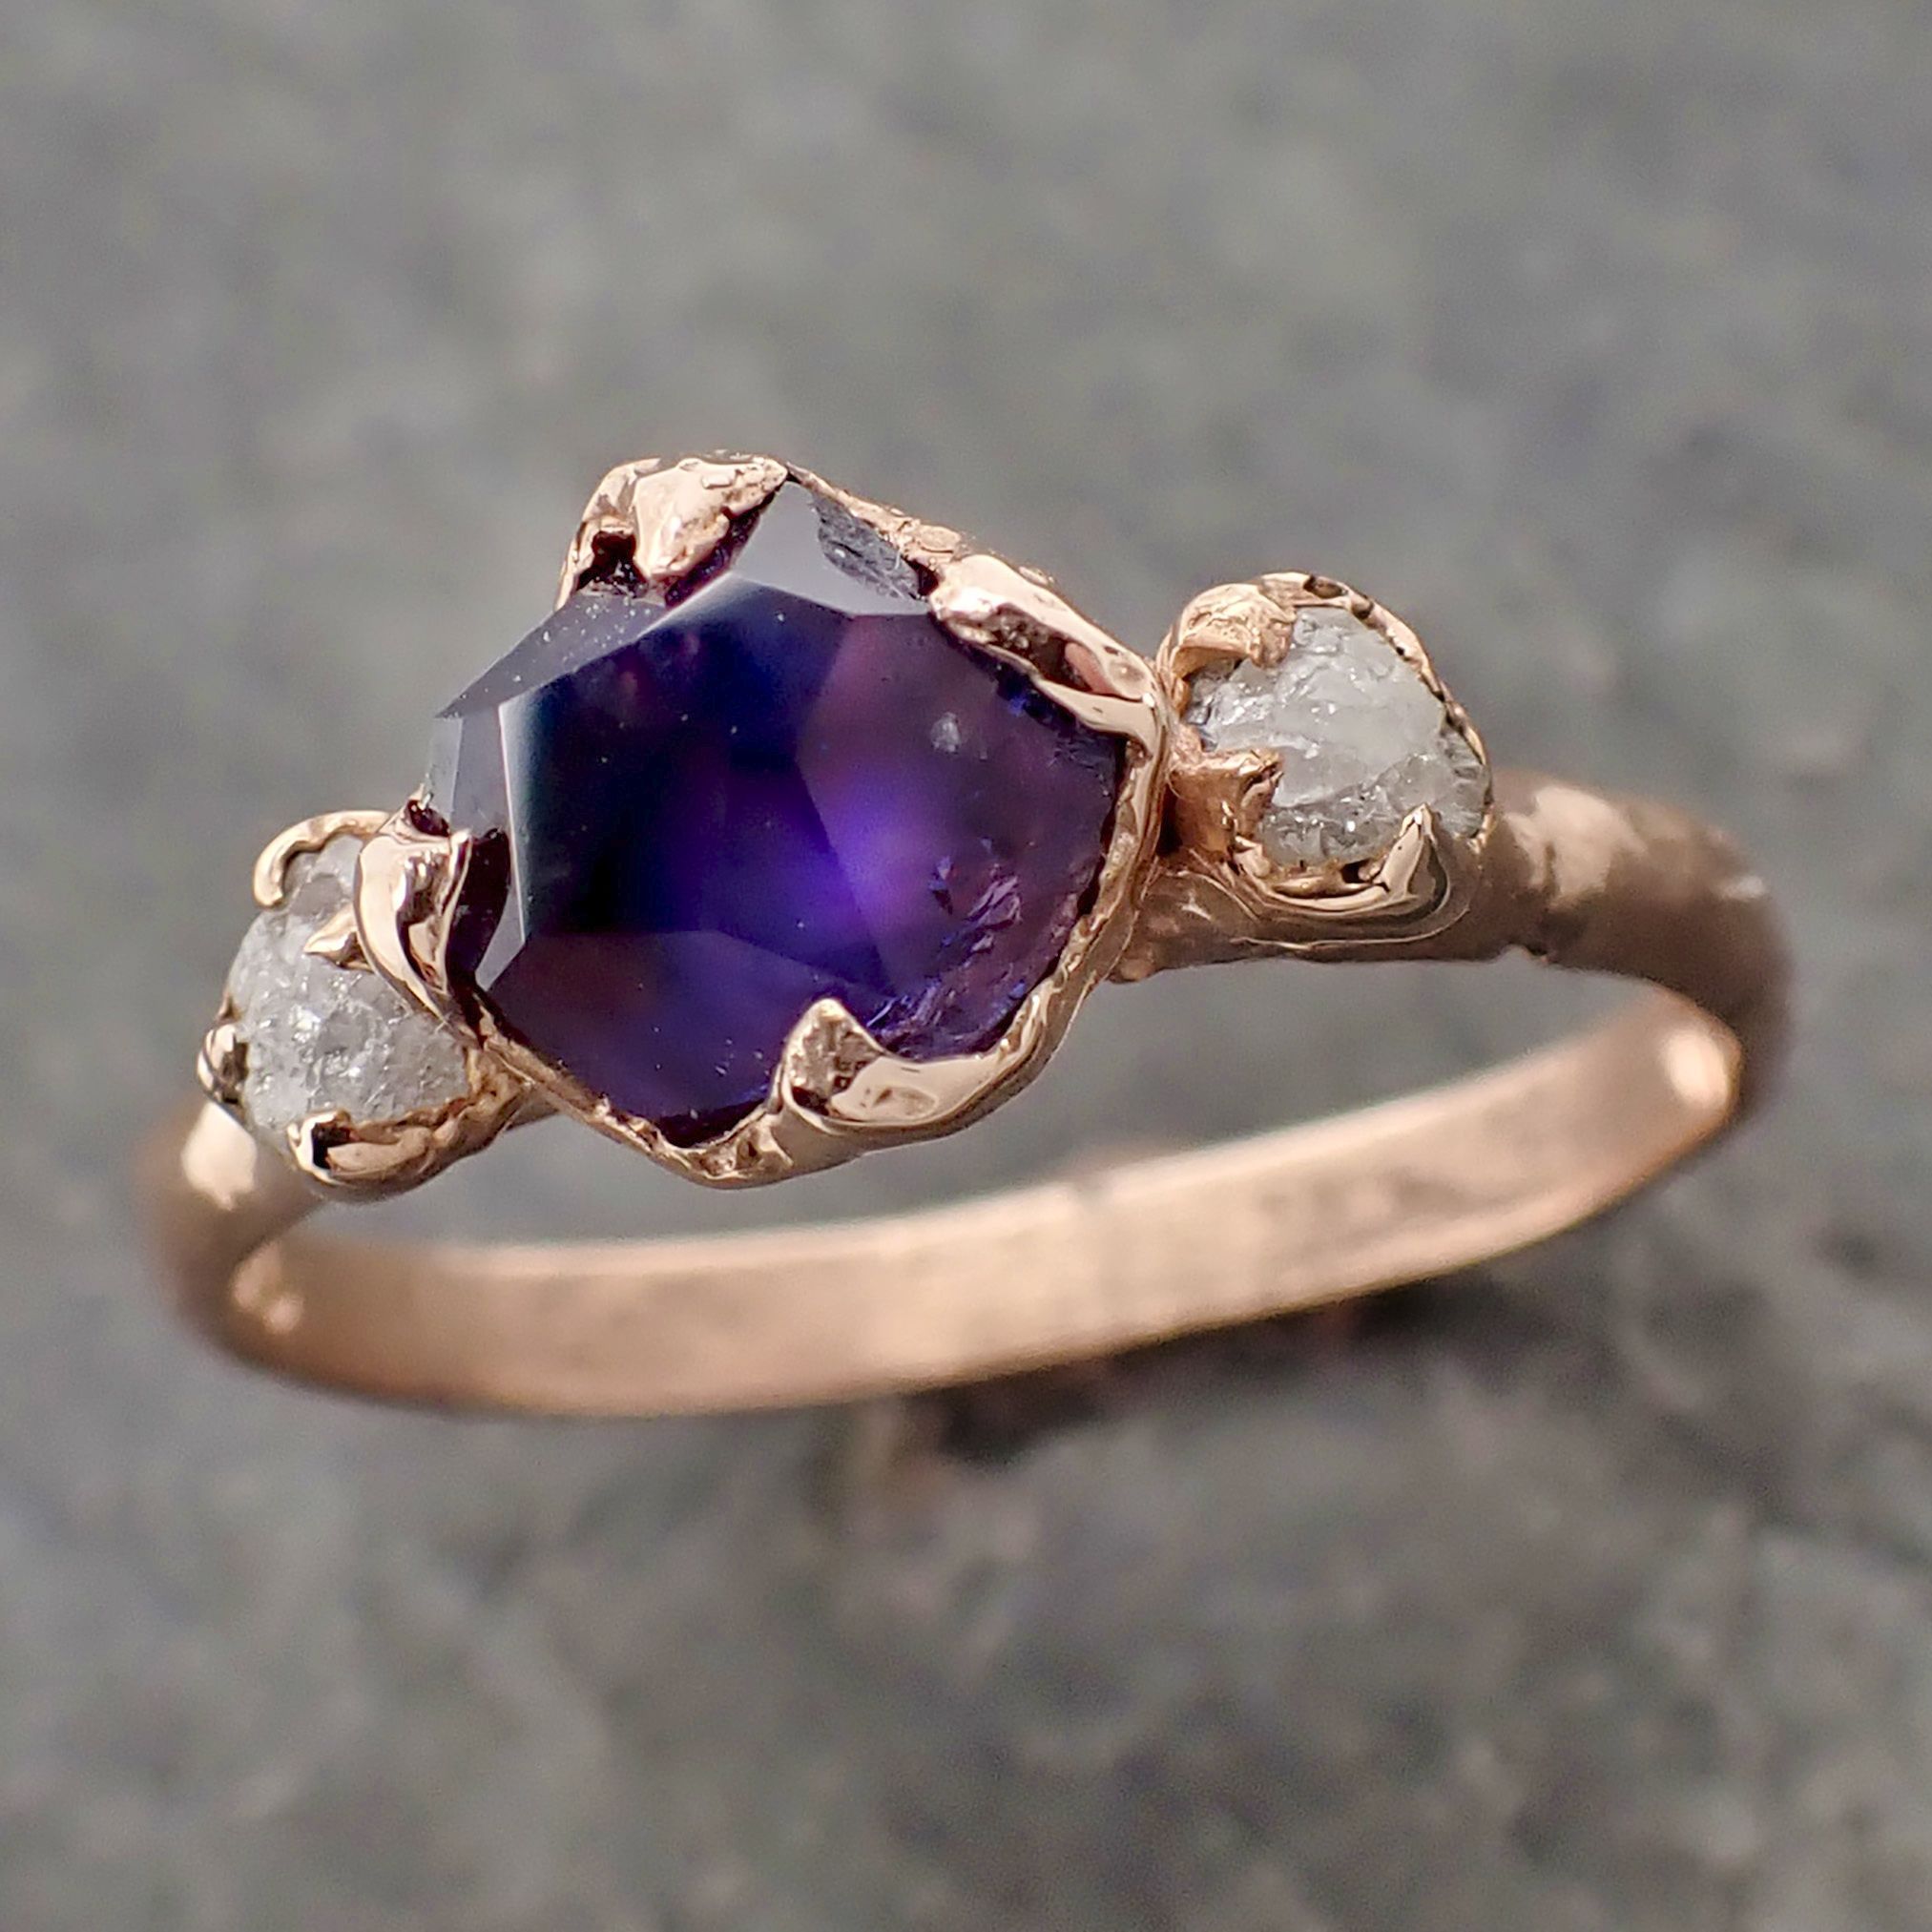 sapphire partially faceted multi stone rough diamond 14k rose gold engagement ring wedding ring custom one of a kind gemstone ring 2175 Alternative Engagement